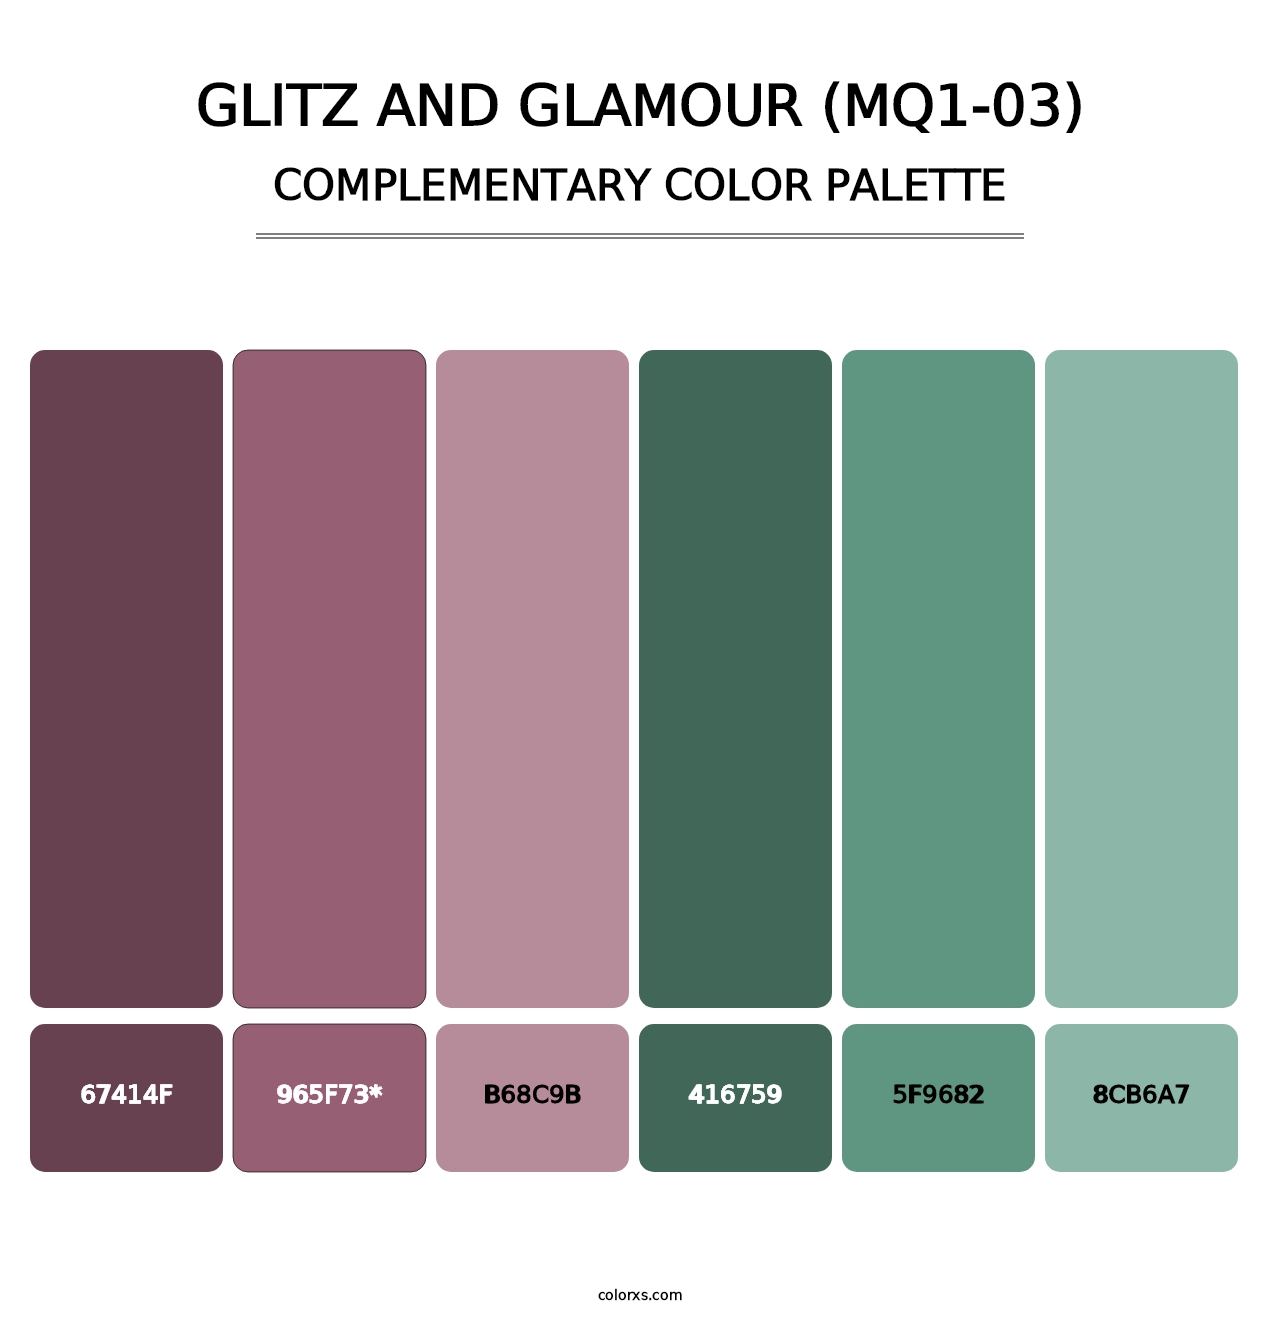 Glitz And Glamour (MQ1-03) - Complementary Color Palette